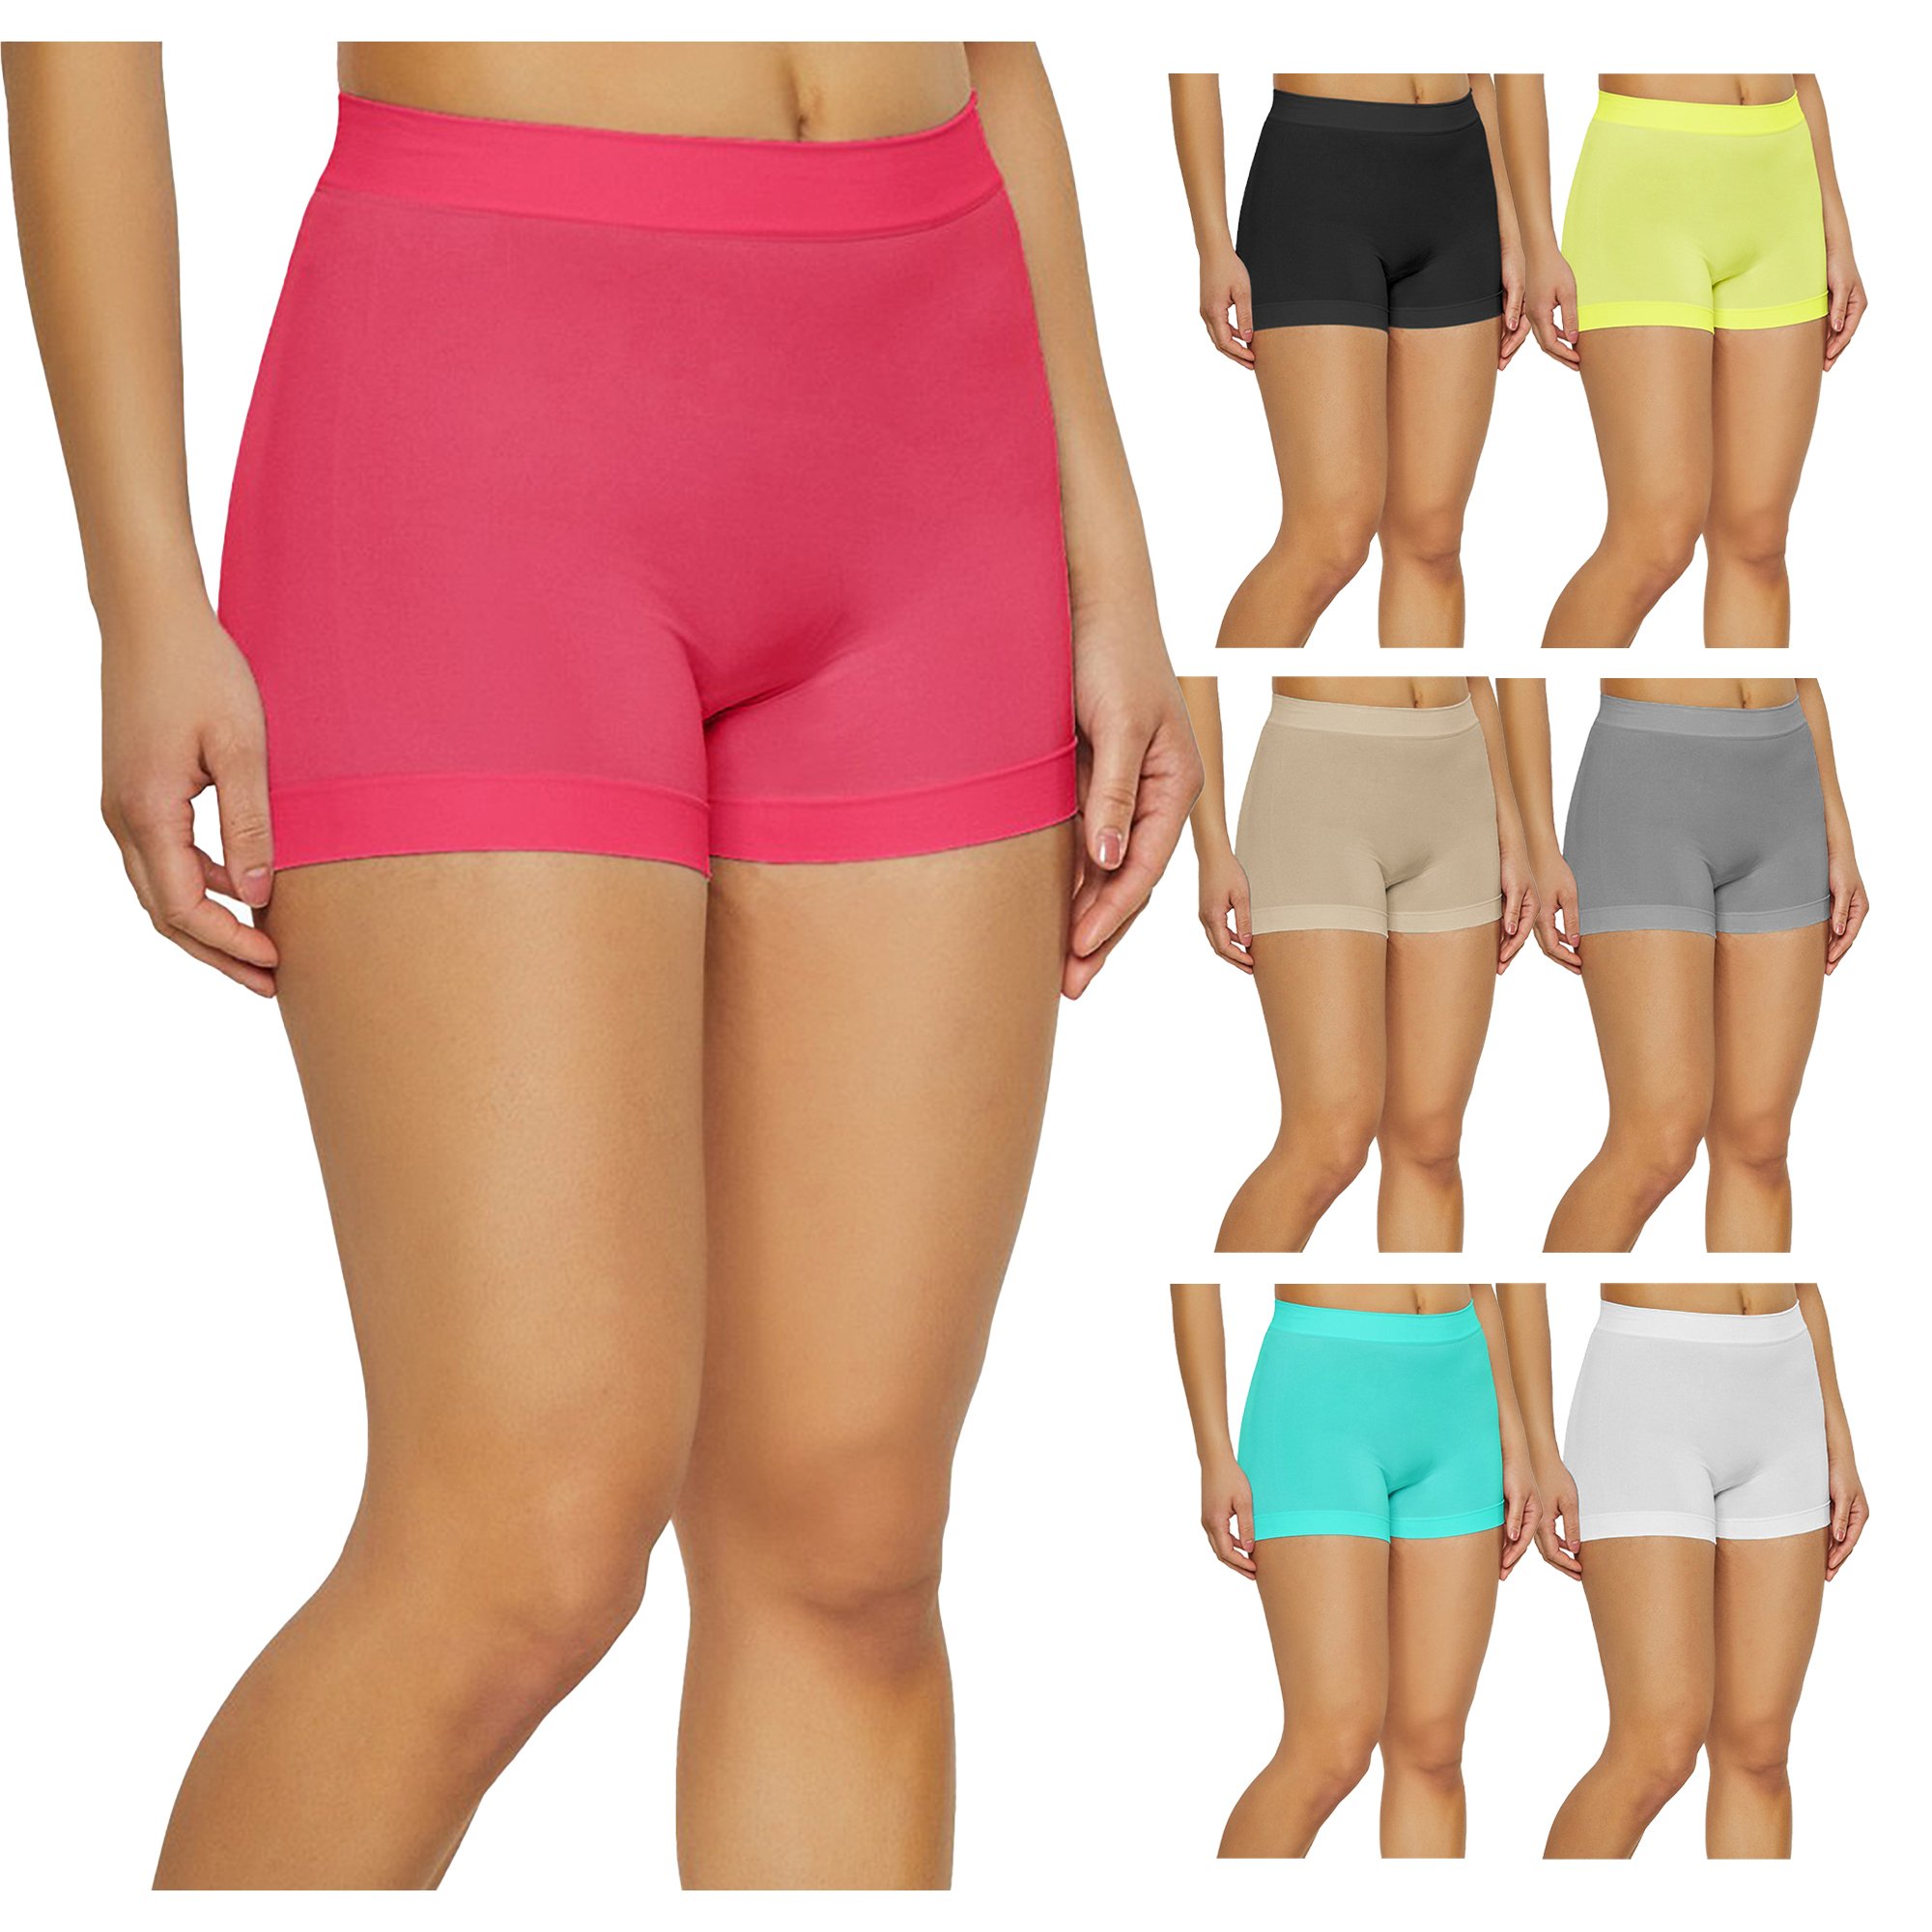 12-Pack Women's High Waisted Biker Bottom Shorts For Yoga Gym Running Ladies Pants - CORAL, XXL